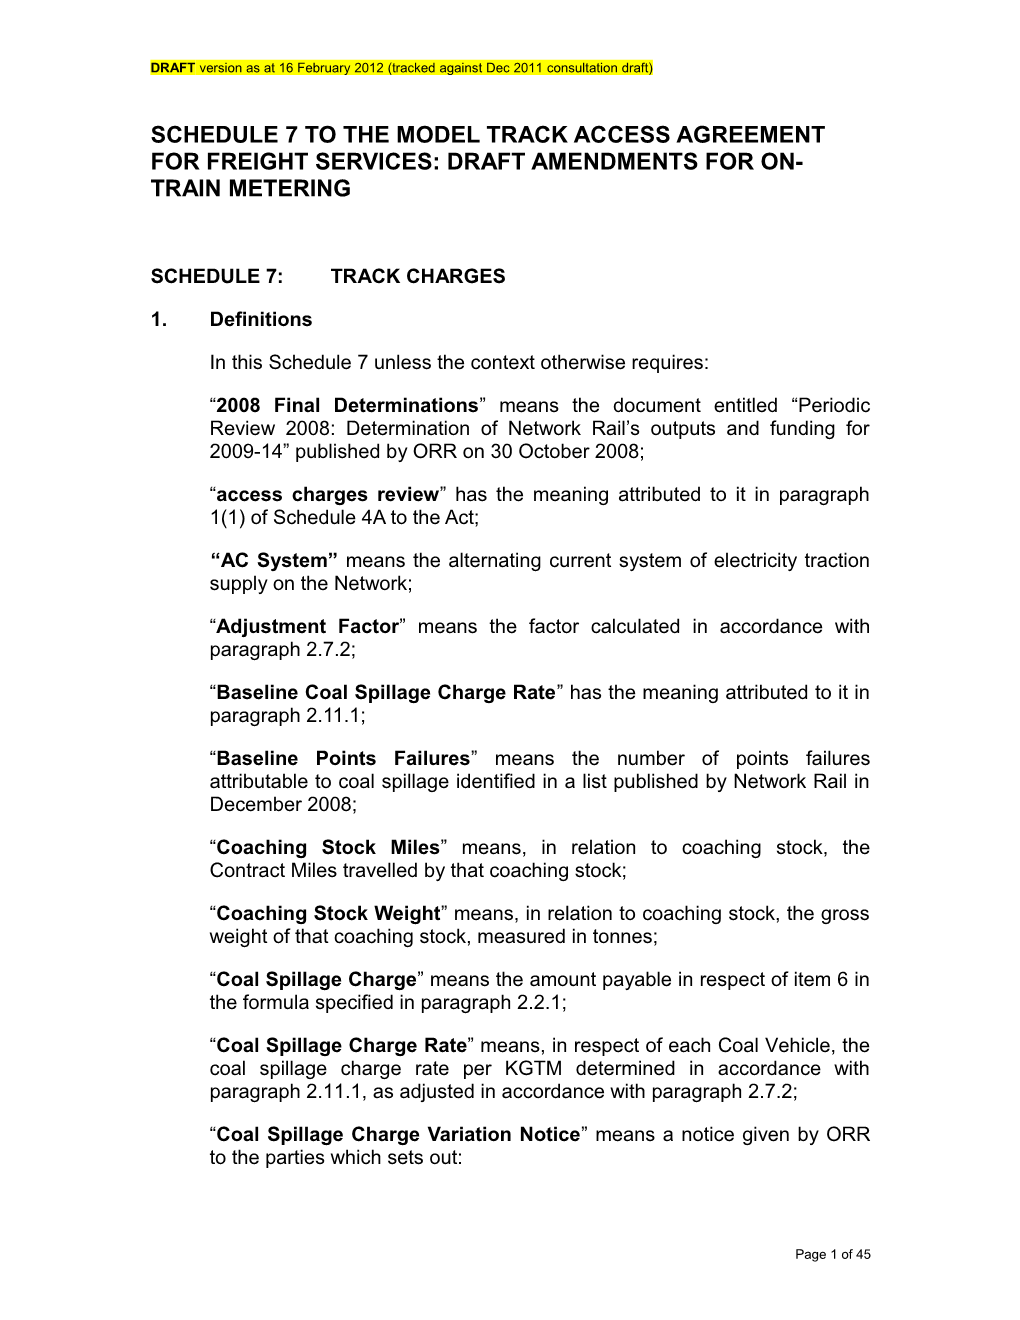 Template Freight Schedule 7 - Tracked Against Consultation Draft (16 Feb 2012)